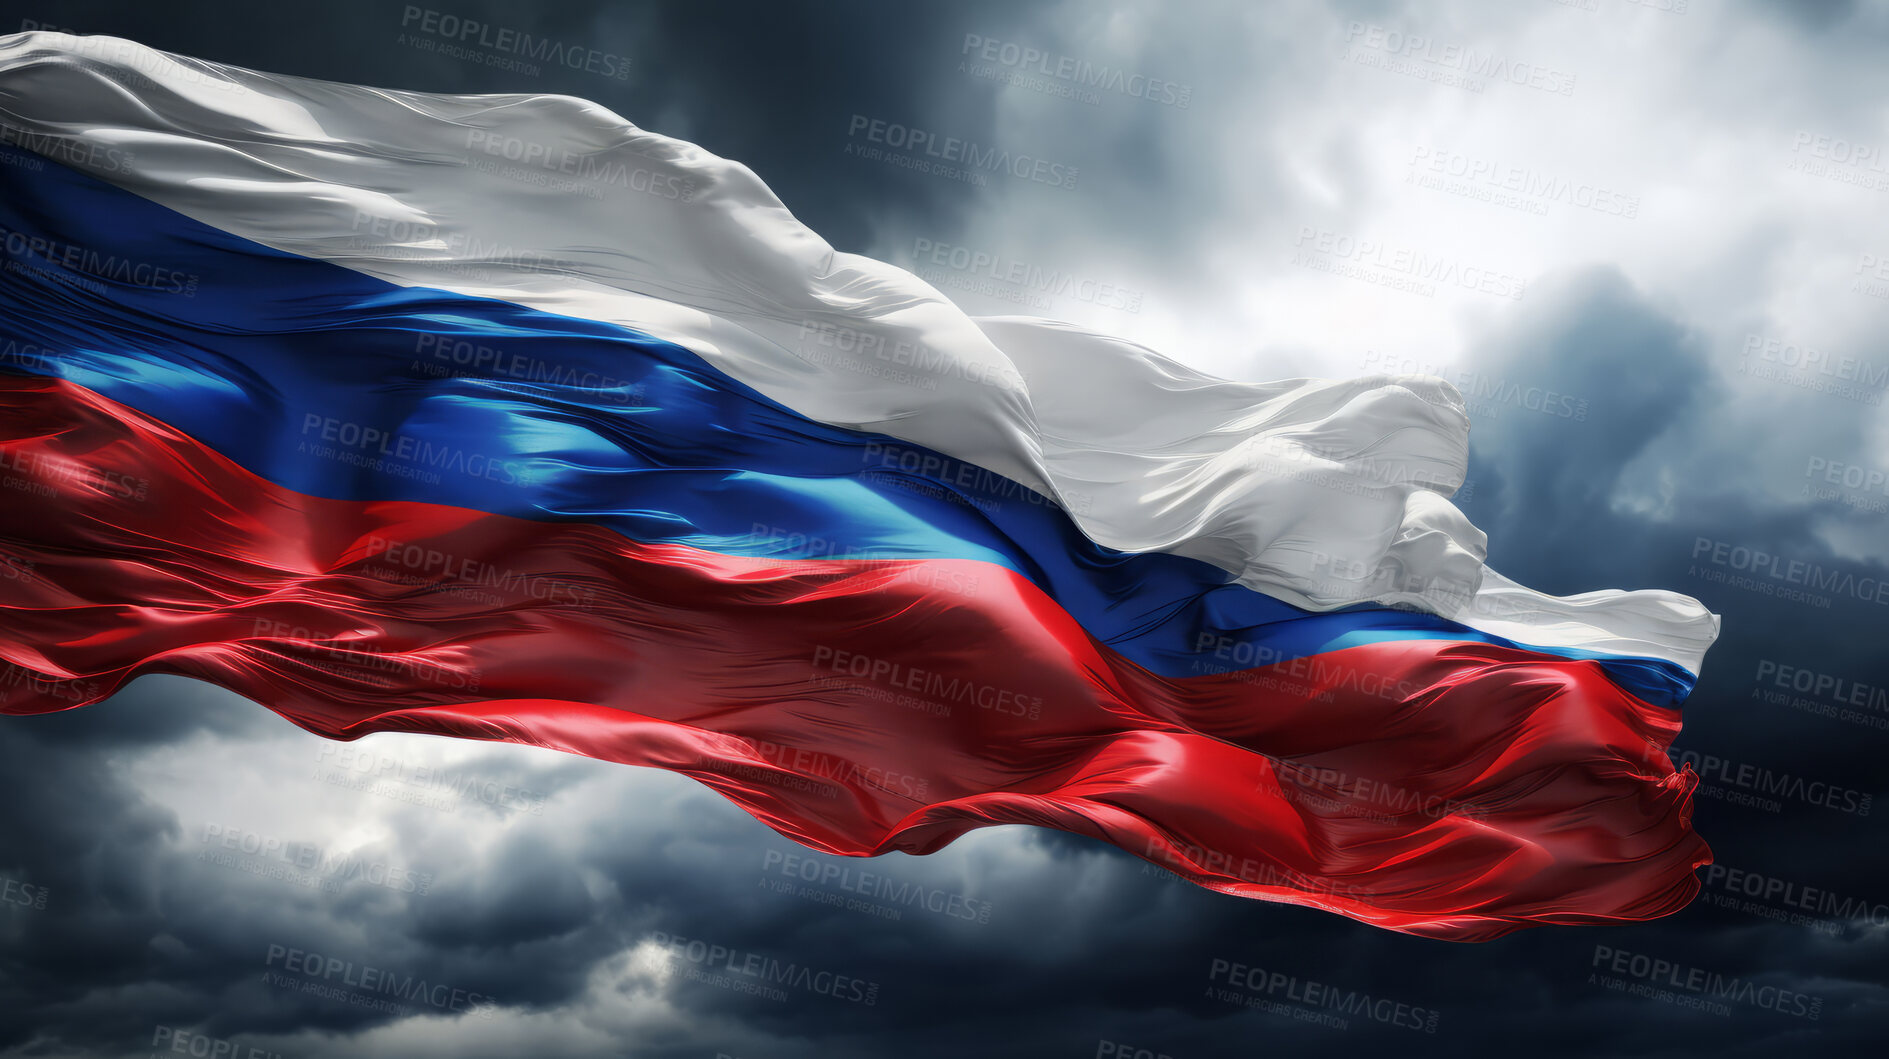 Buy stock photo Russia flag in the wind. Symbol for patriotism, freedom, and politics concept